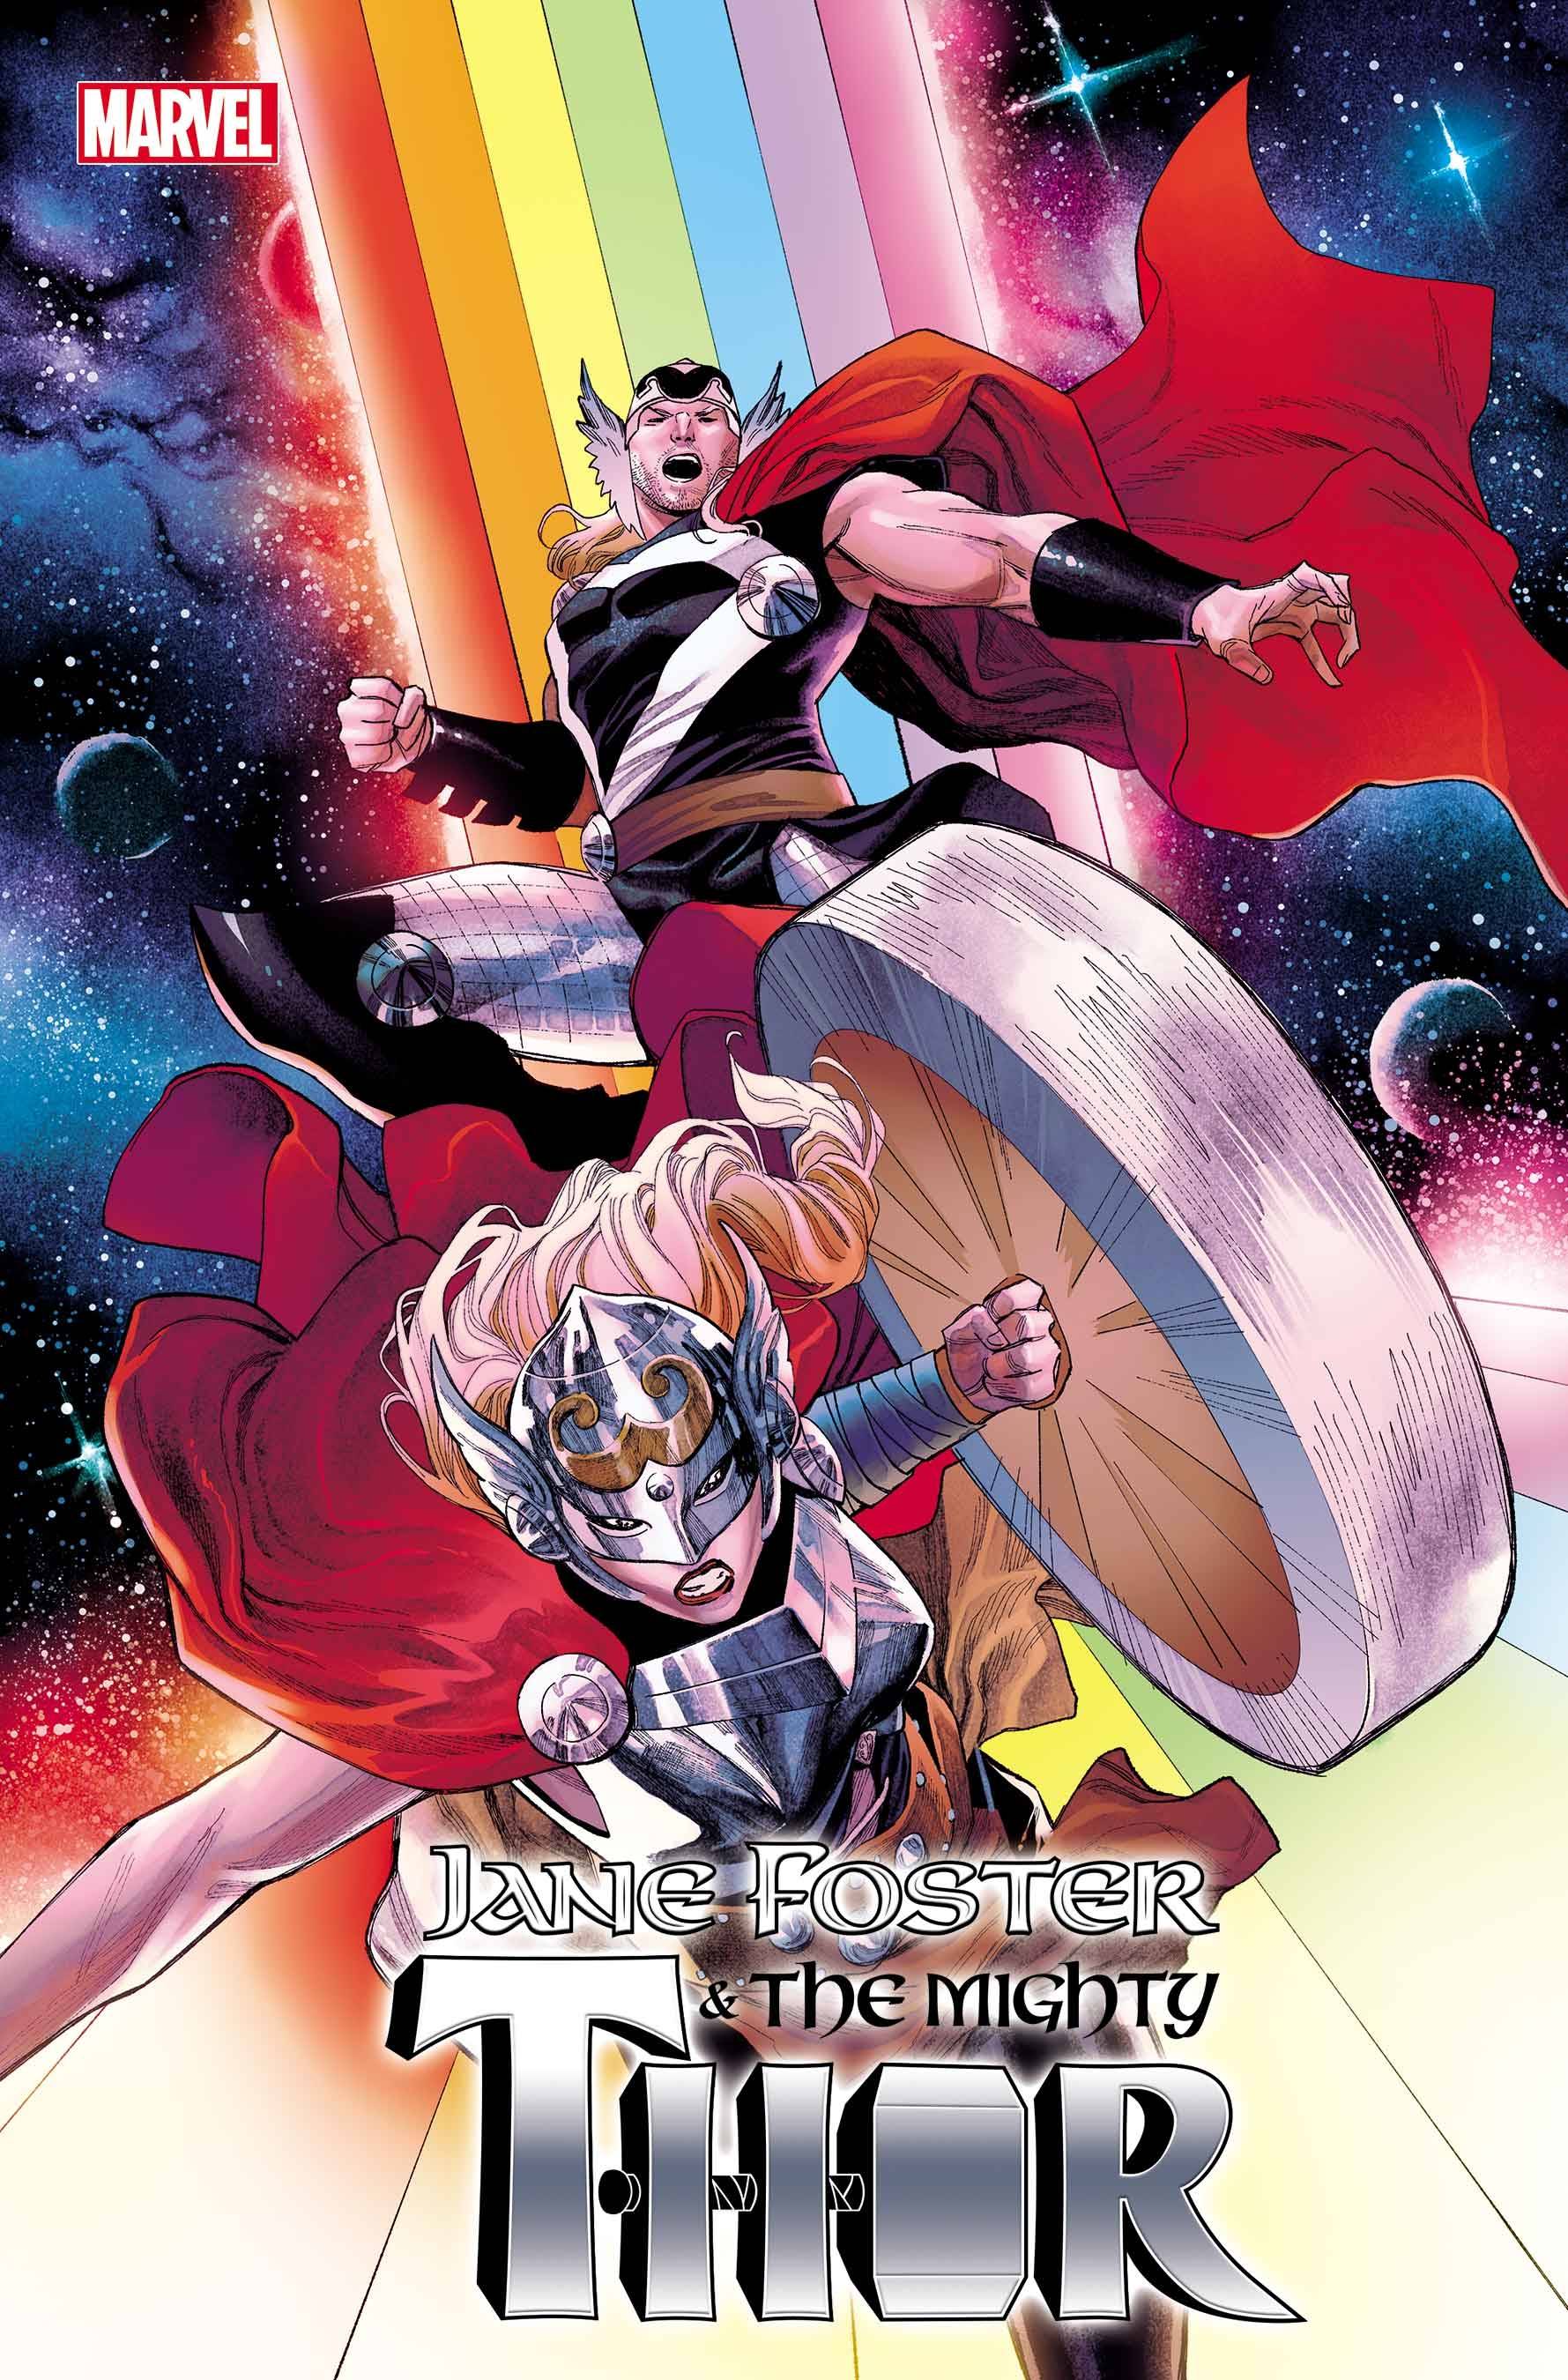 06/08/2022 JANE FOSTER MIGHTY THOR #1 (OF 5) 1:25 COPY INCV COCCOLO VARIANT